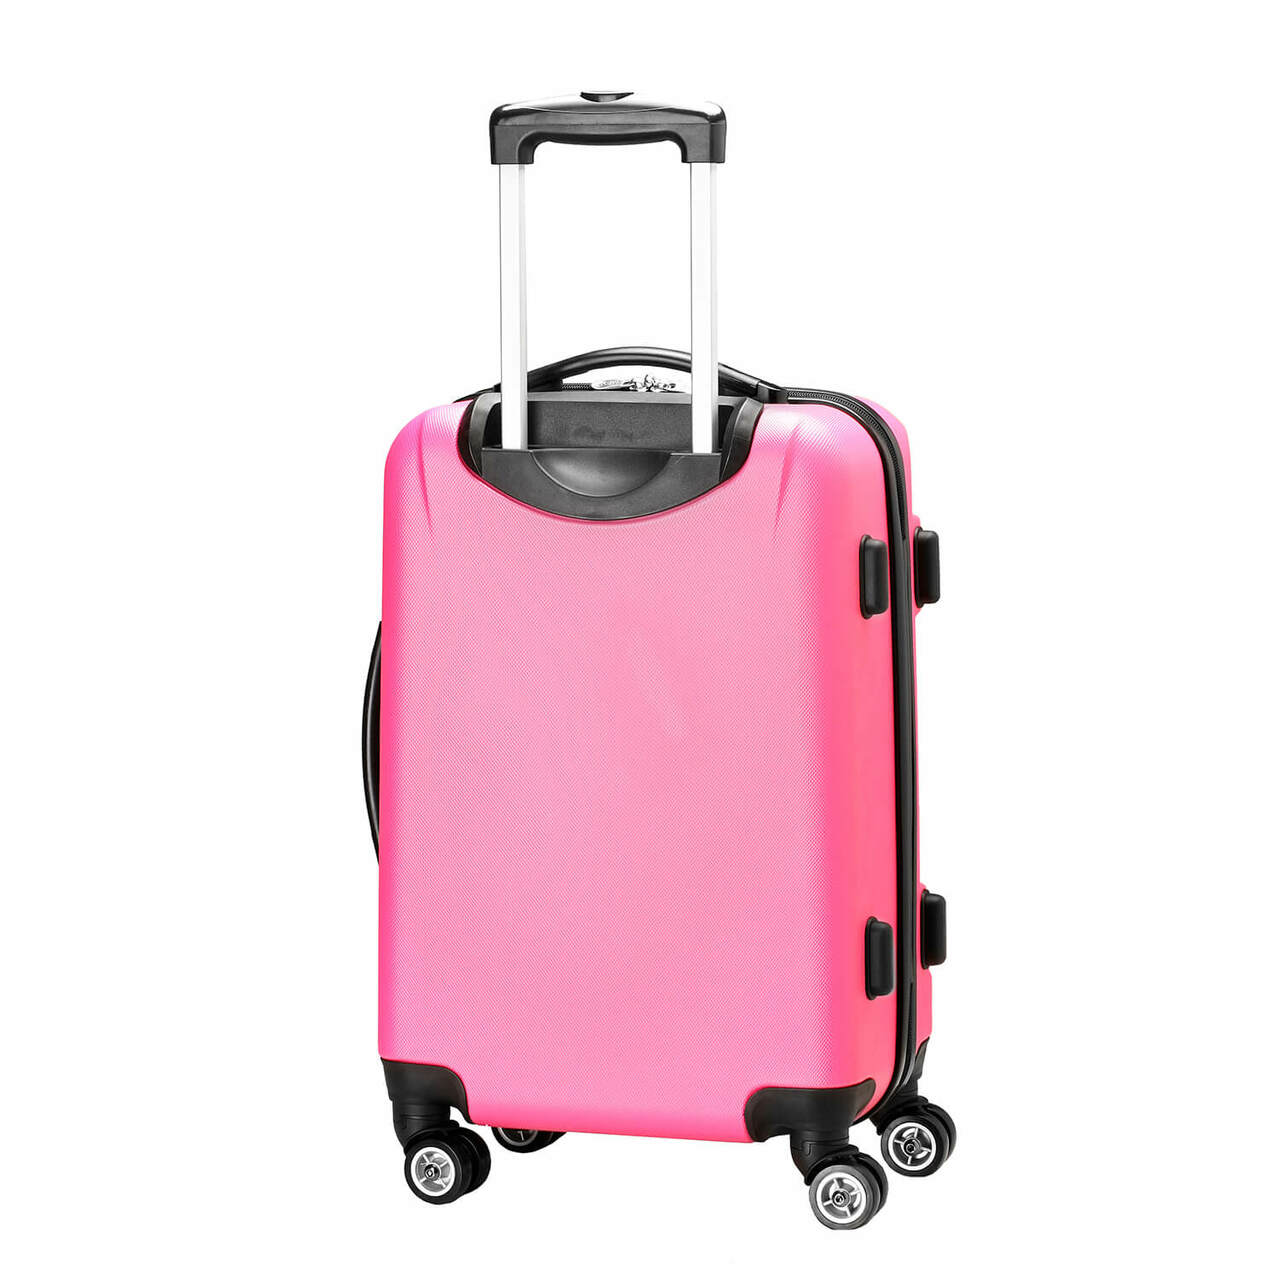 Indiana Hoosiers 20" Pink Domestic Carry-on Spinner